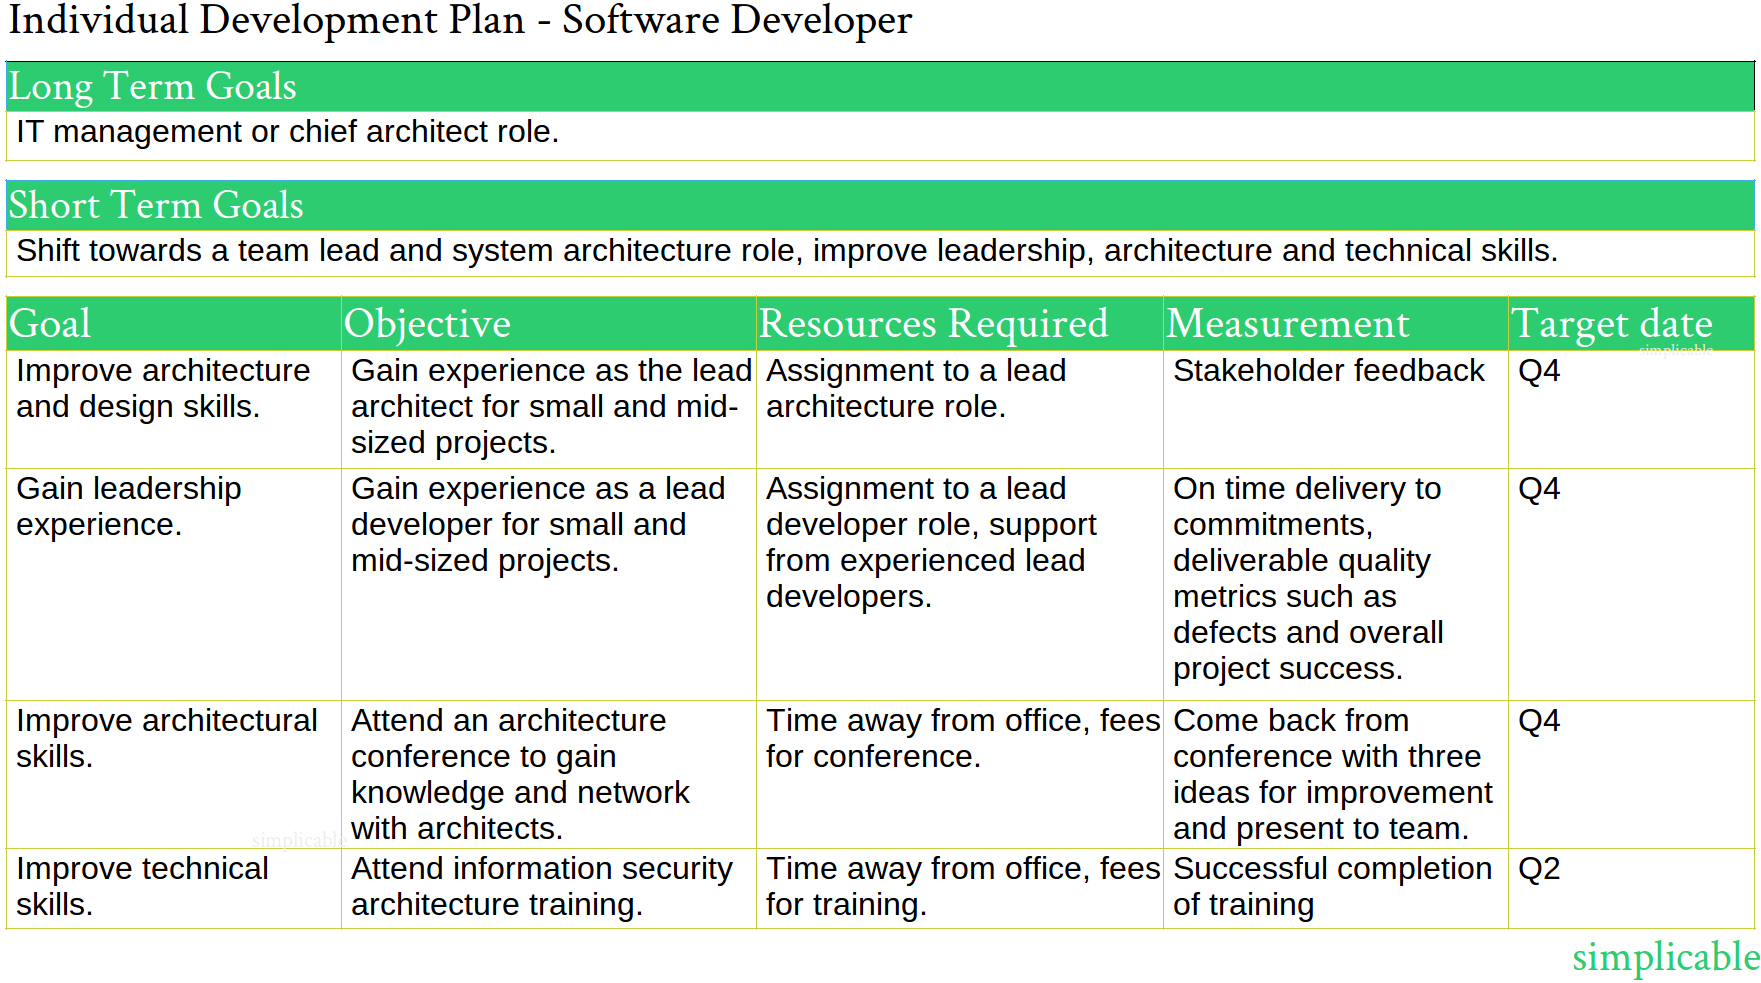 An illustrative individual development plan for a software developer who is seeking more experience leading teams and designing system architecture.